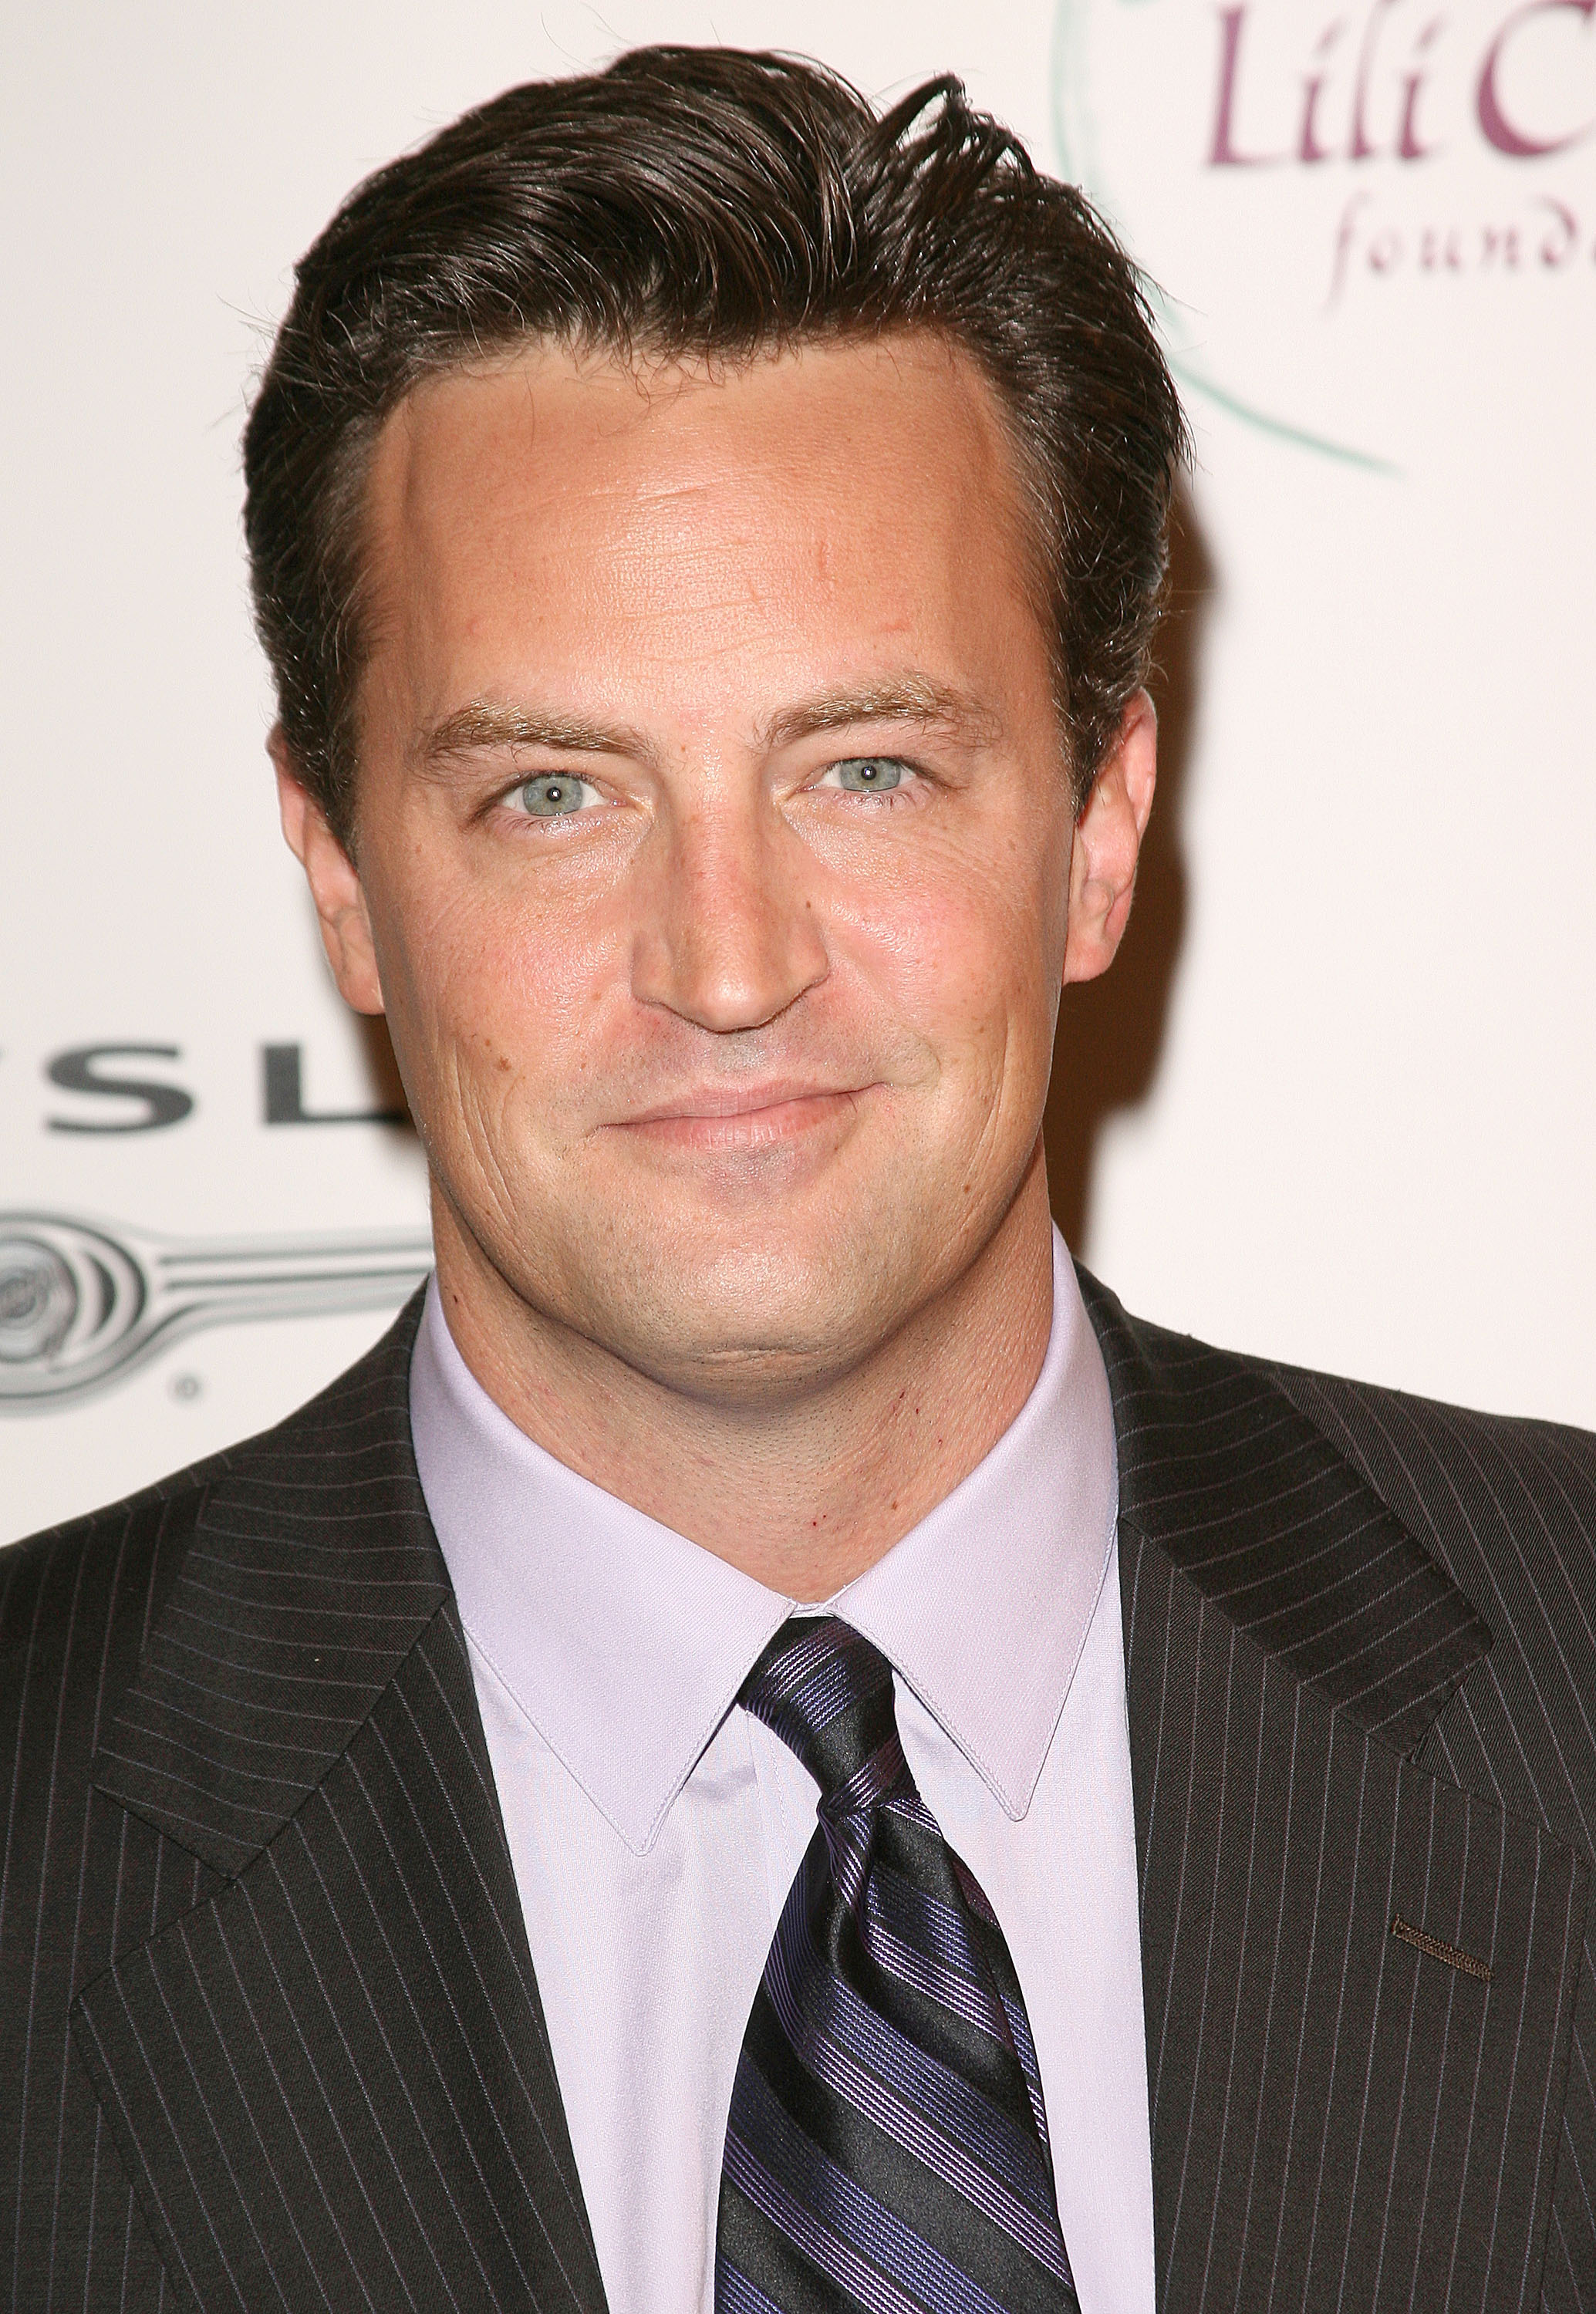 Matthew Perry Looks ‘Ill’ with ‘Swollen’ Right Hand Years after Coma ...